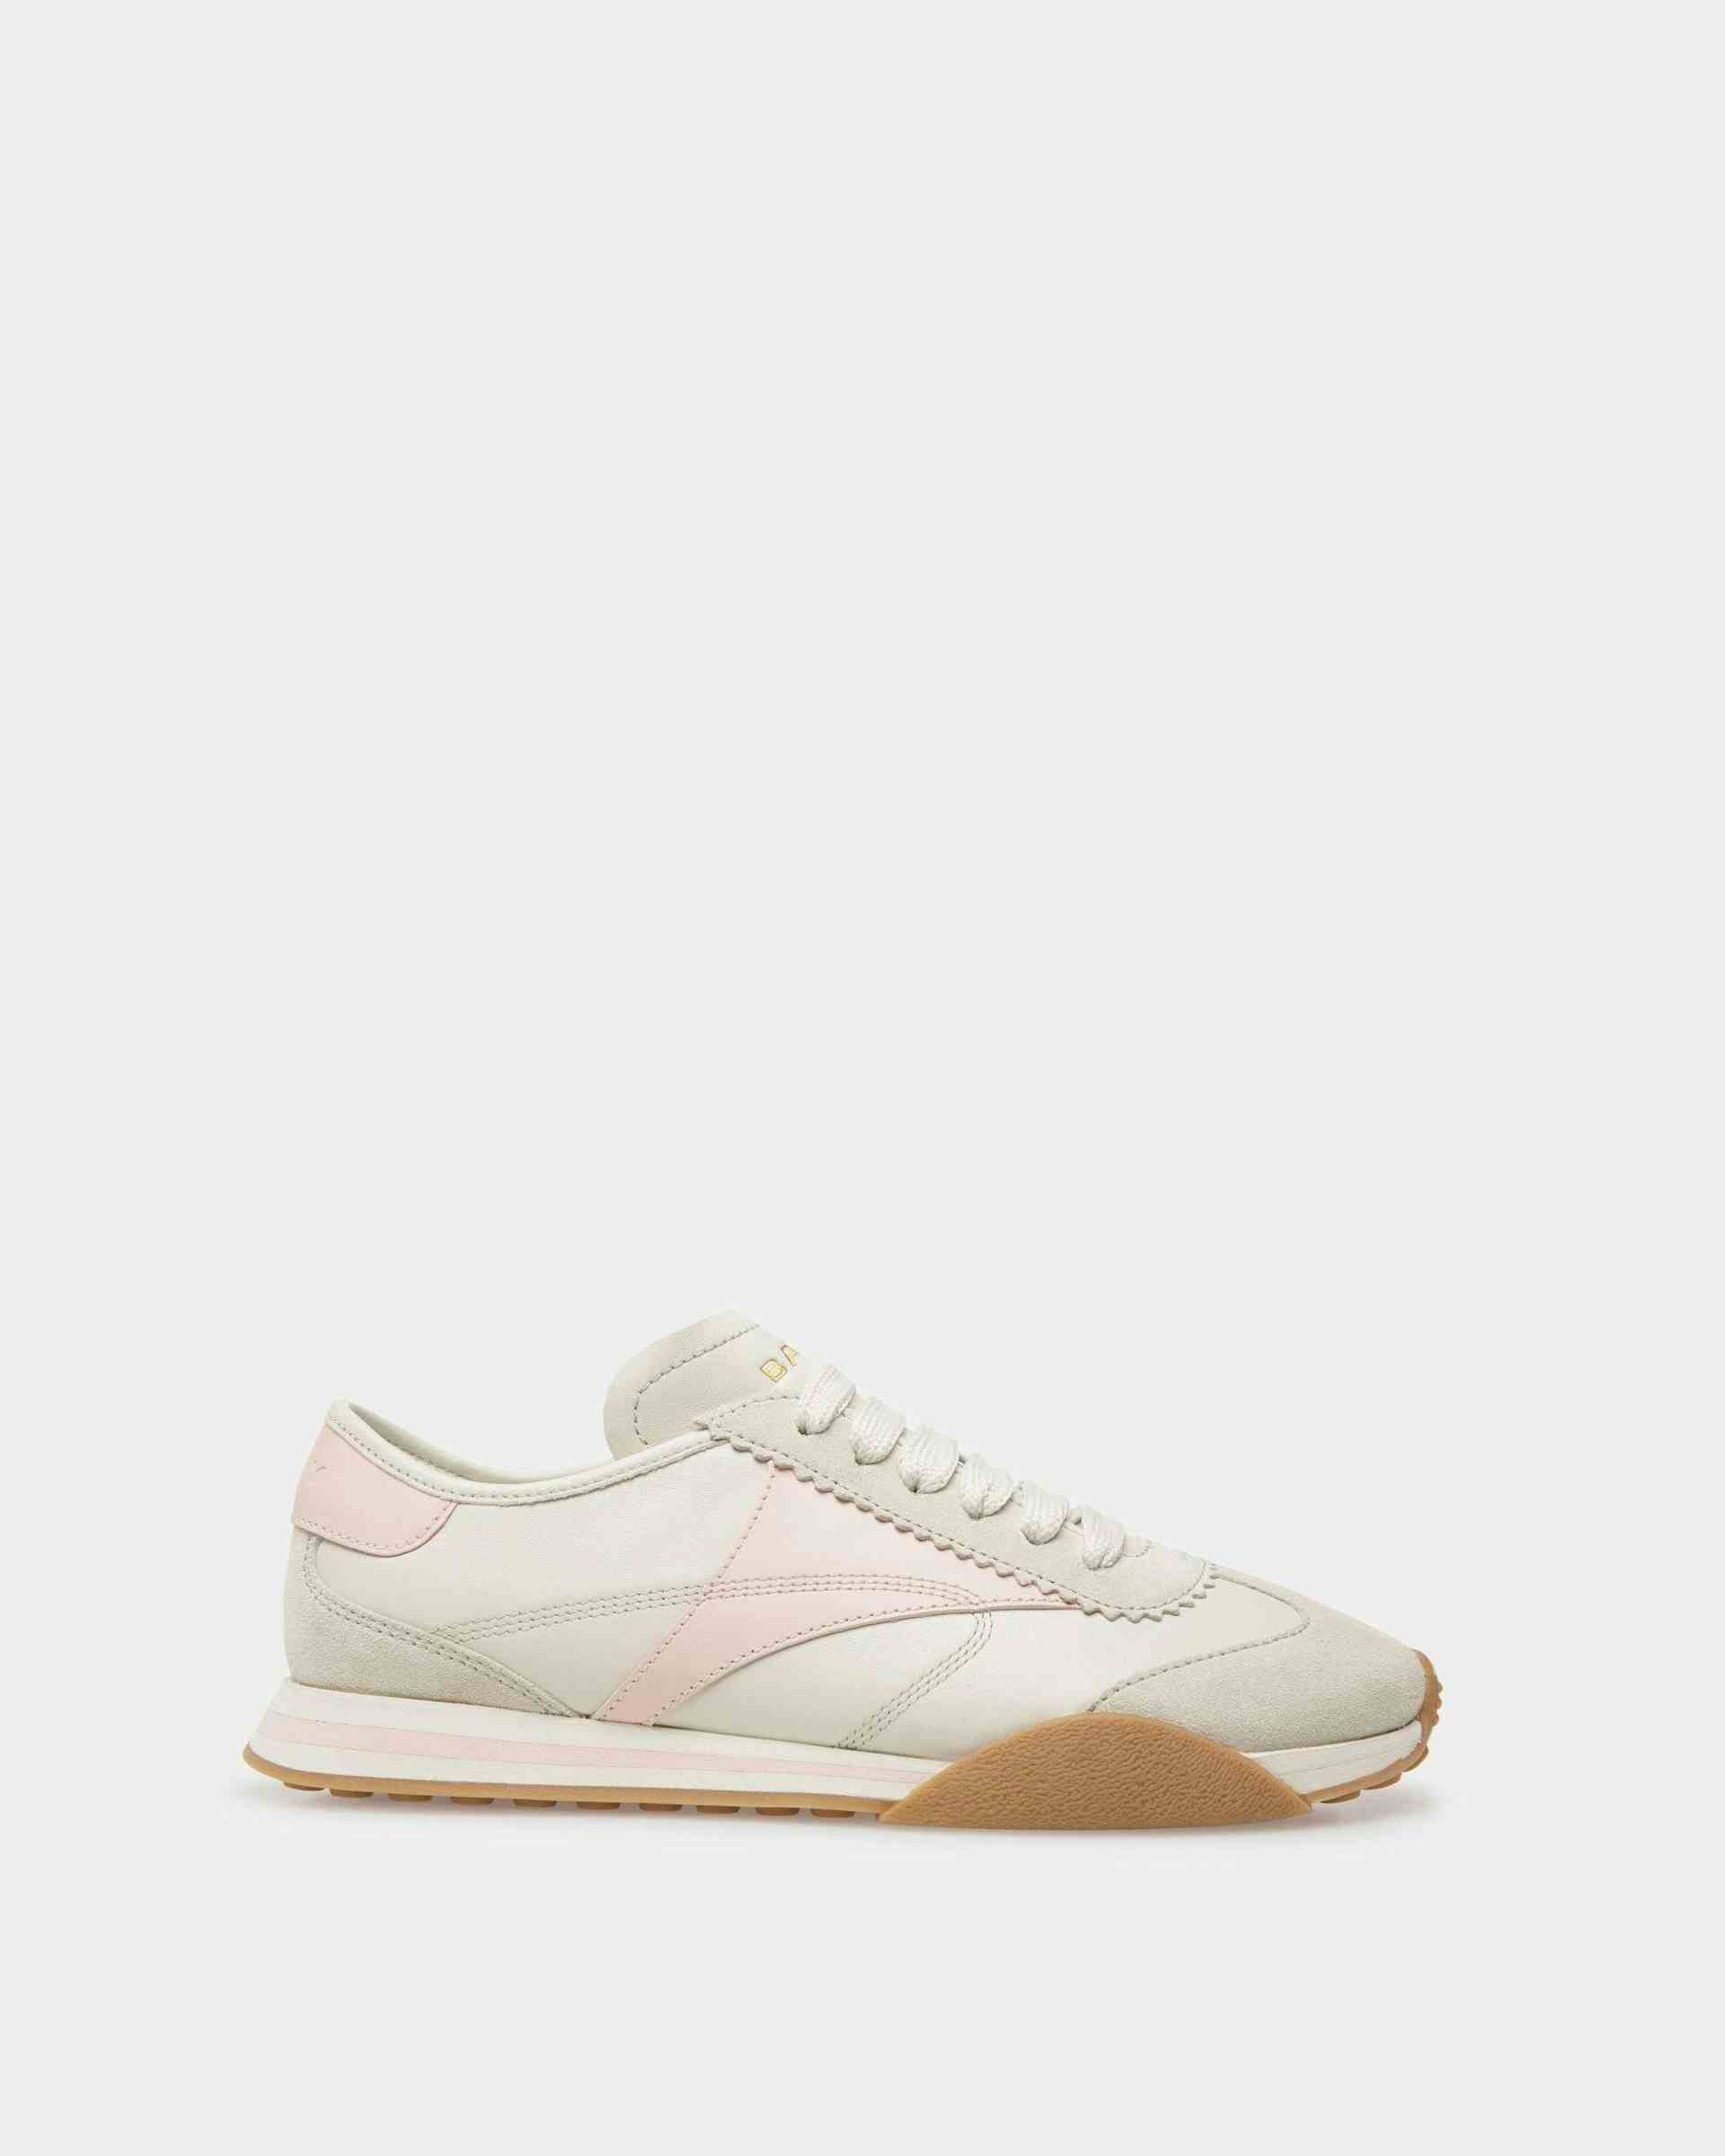 Sussex Sneakers In Dusty White And Rose Leather - Women's - Bally